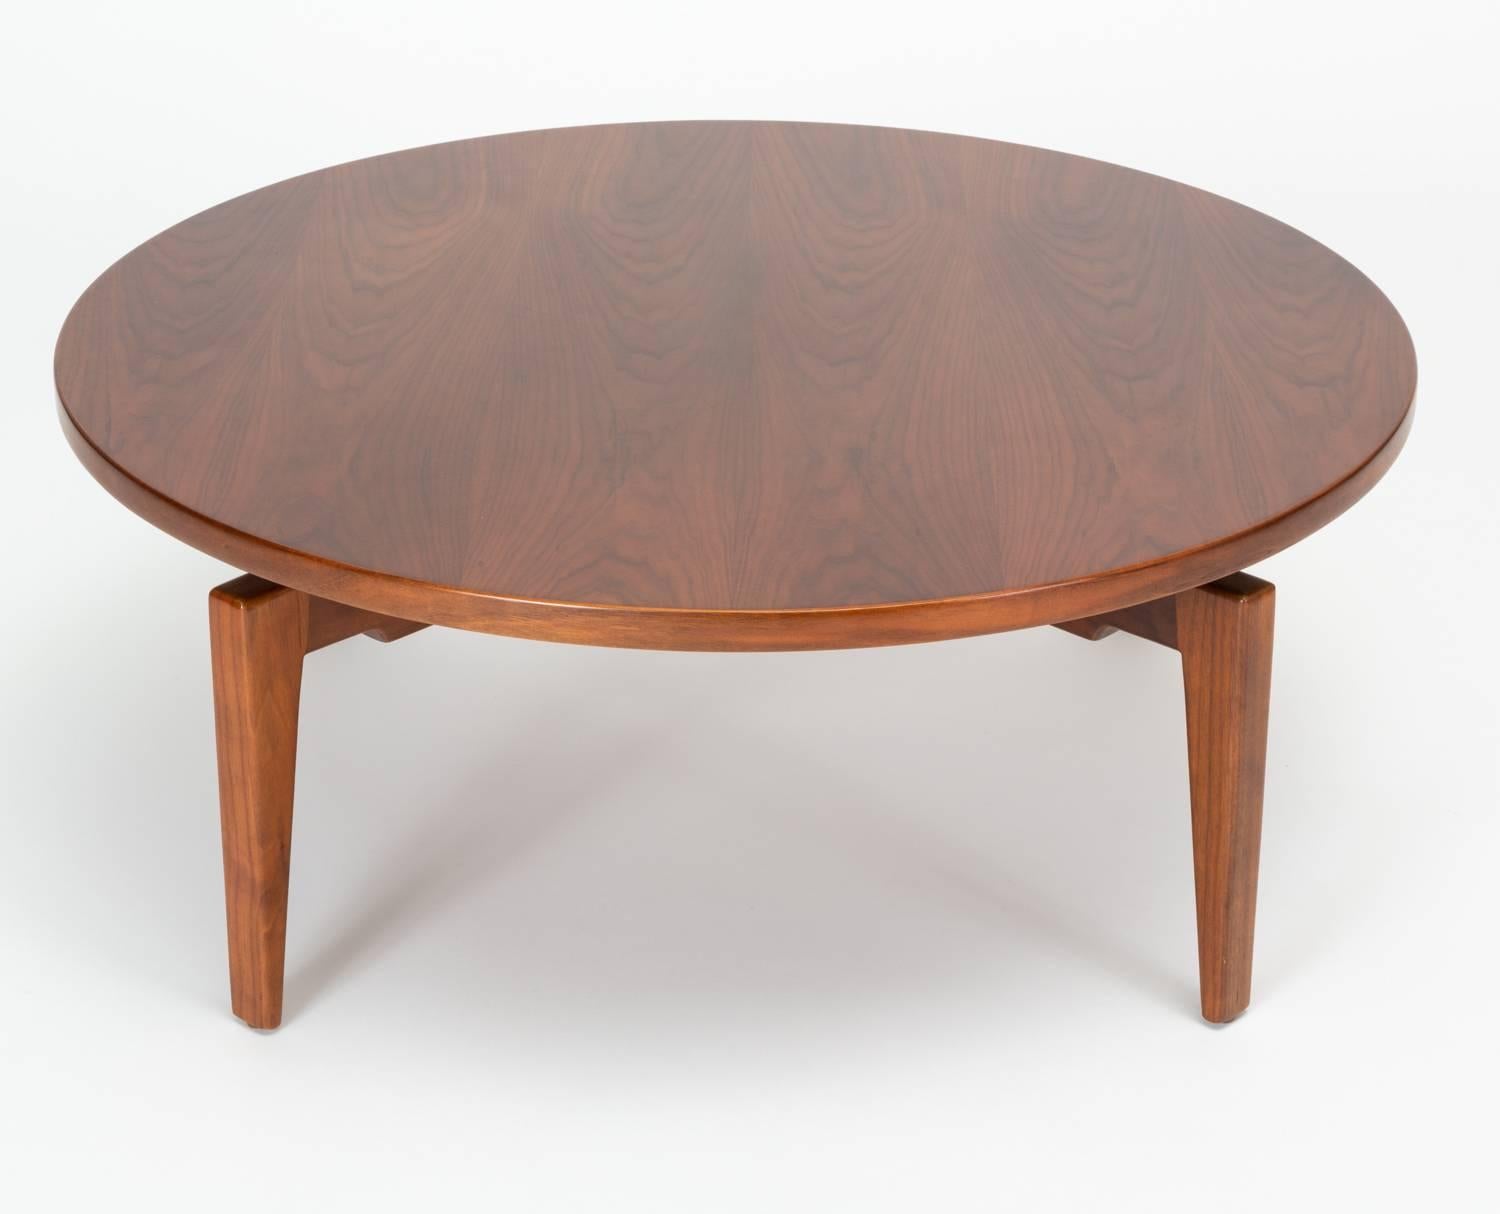 A 1958 design for a large round walnut coffee table by Jens Risom that rotates on a central mechanism for a “Lazy Susan” effect. There is a hidden wheel underneath the table that can be adjusted to increase resistance and act as a brake. The four